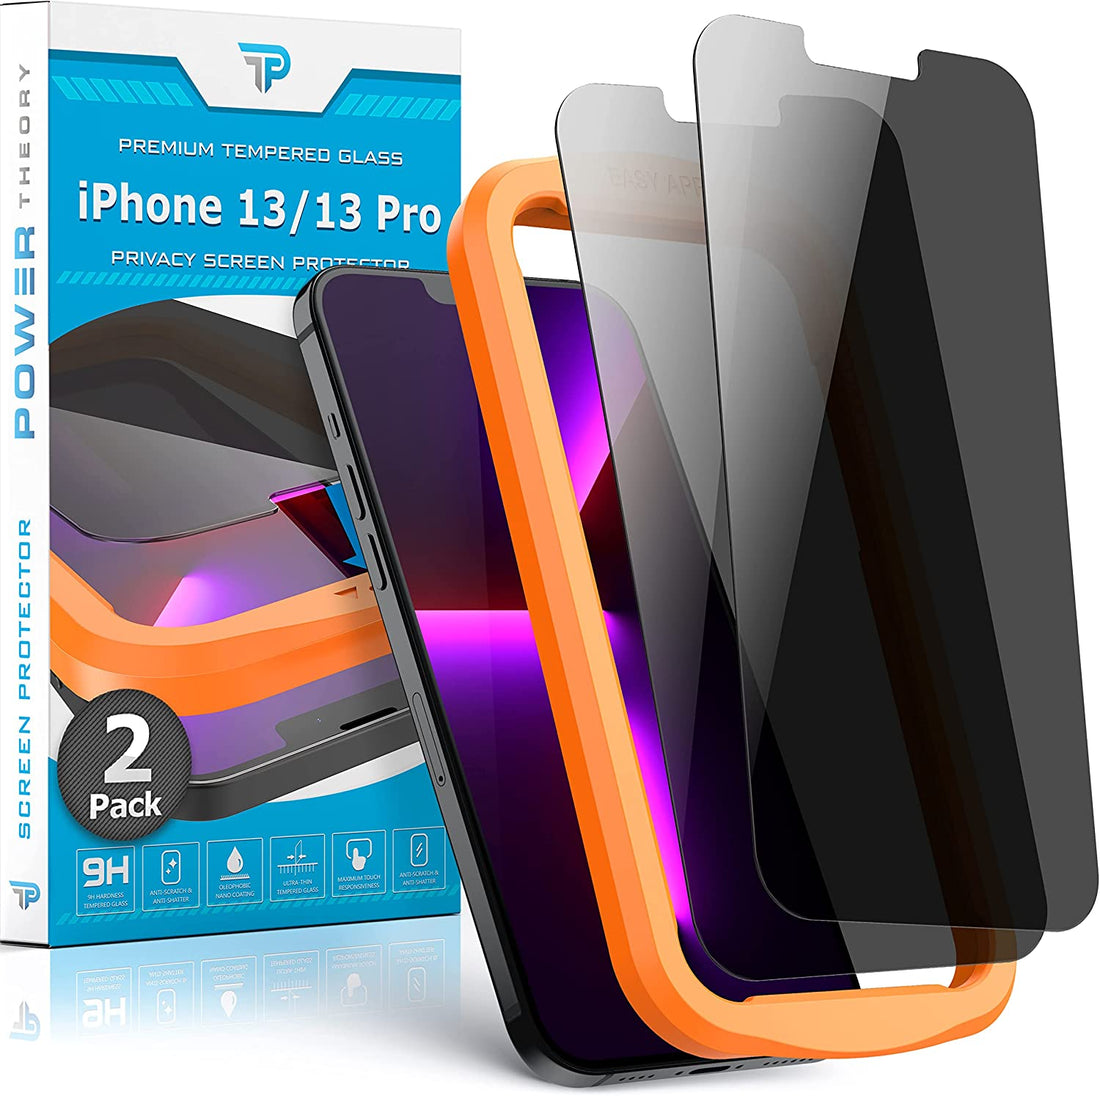 Power Theory Privacy Screen Protector for iPhone 13 Pro/iPhone 13 Tempered Glass [2-Pack] Anti-Spy protection with Easy Install Kit 2022 Preview #1